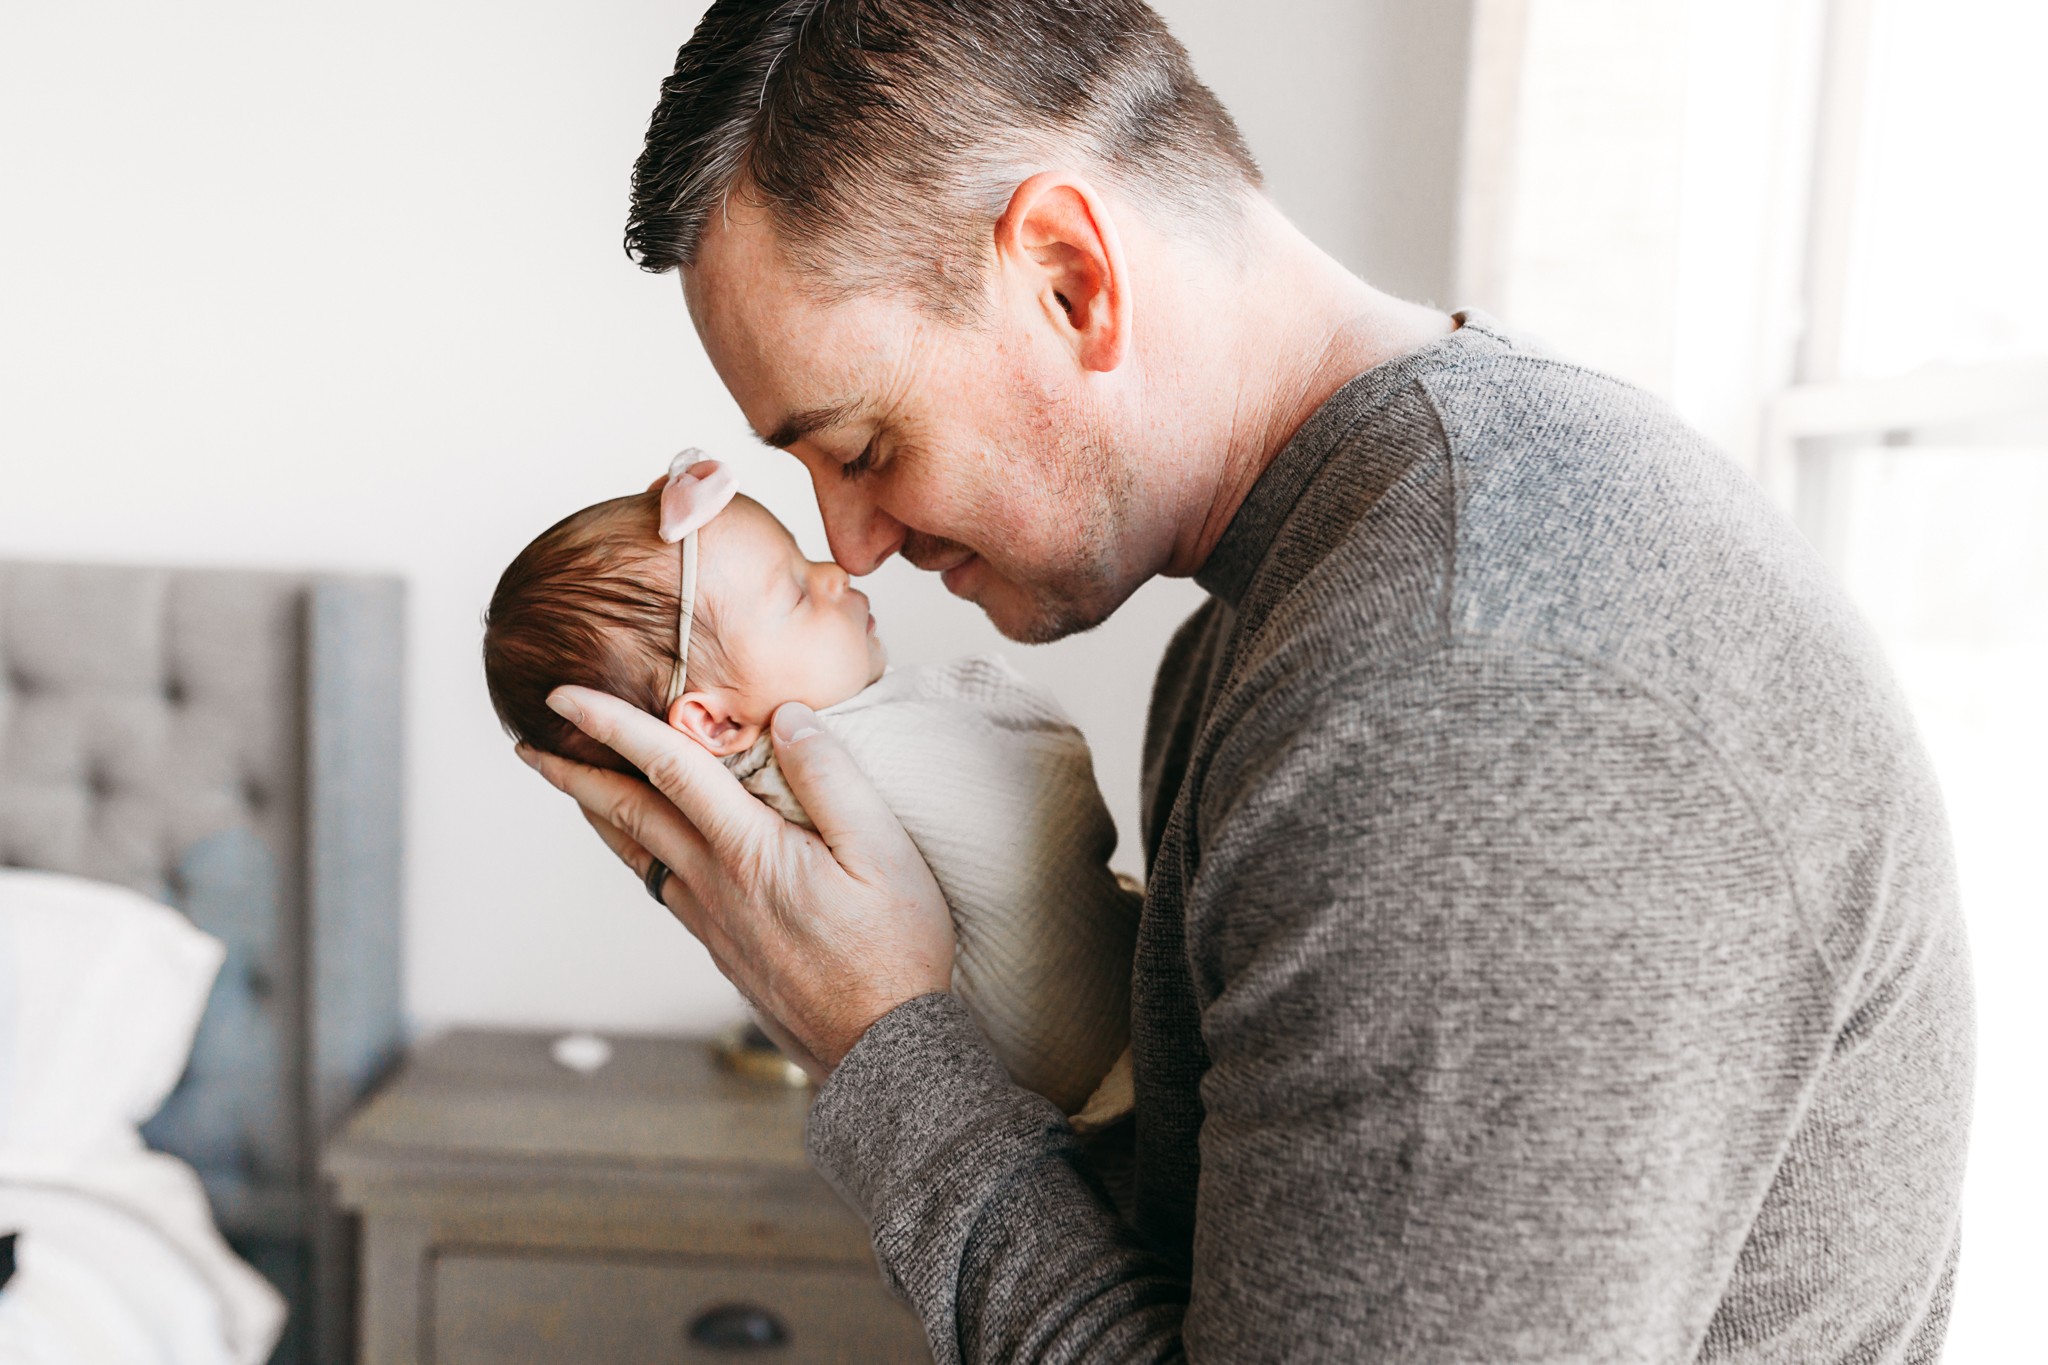 Dad holds new baby during OKC newborn photo session.